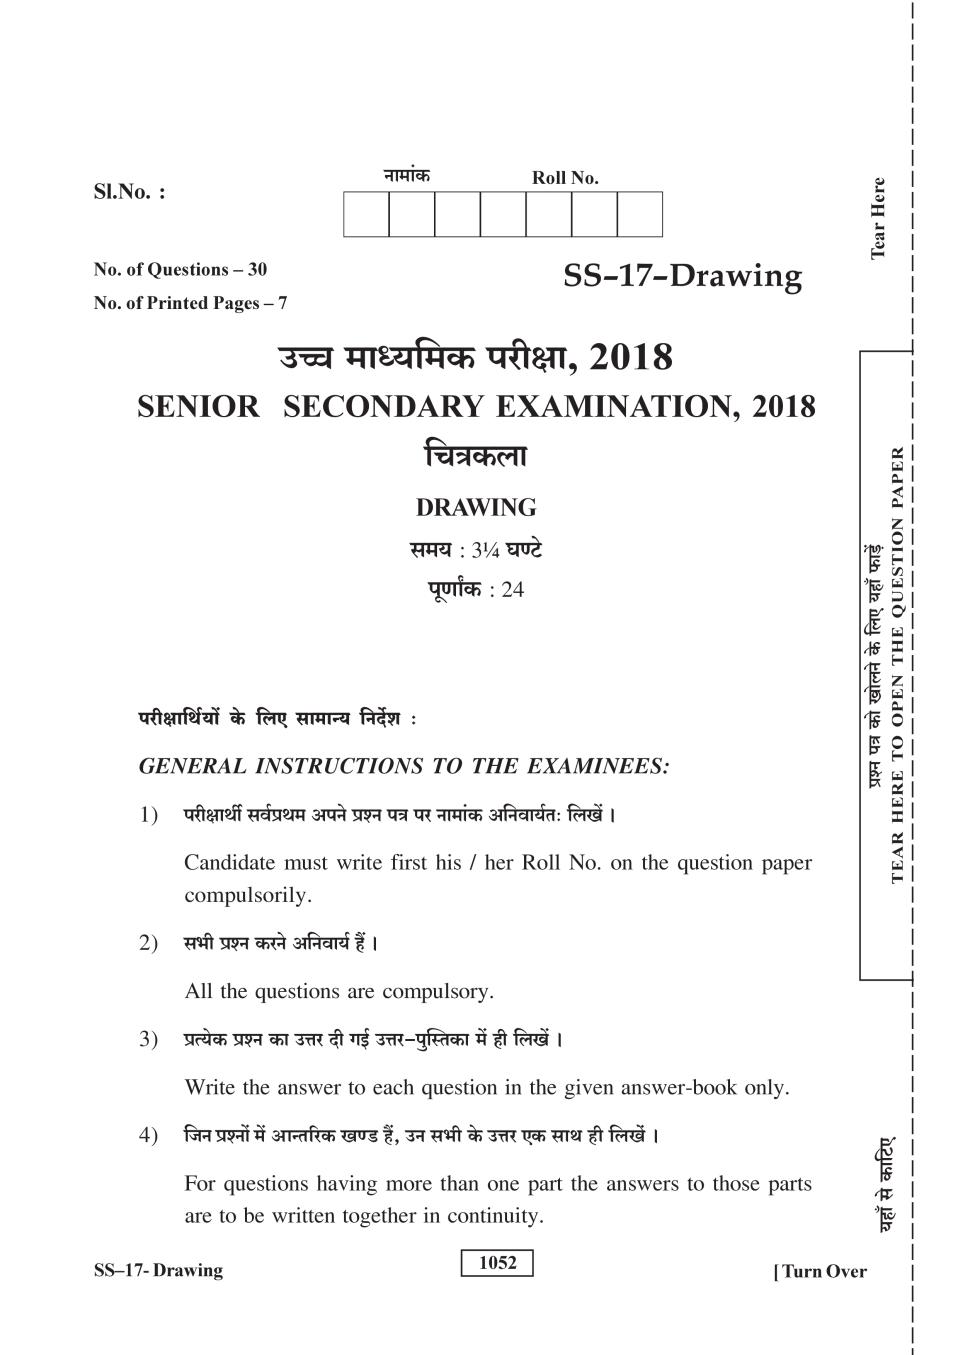 Rajasthan Board 12th Class Drawing Question Paper 2018 - Page 1